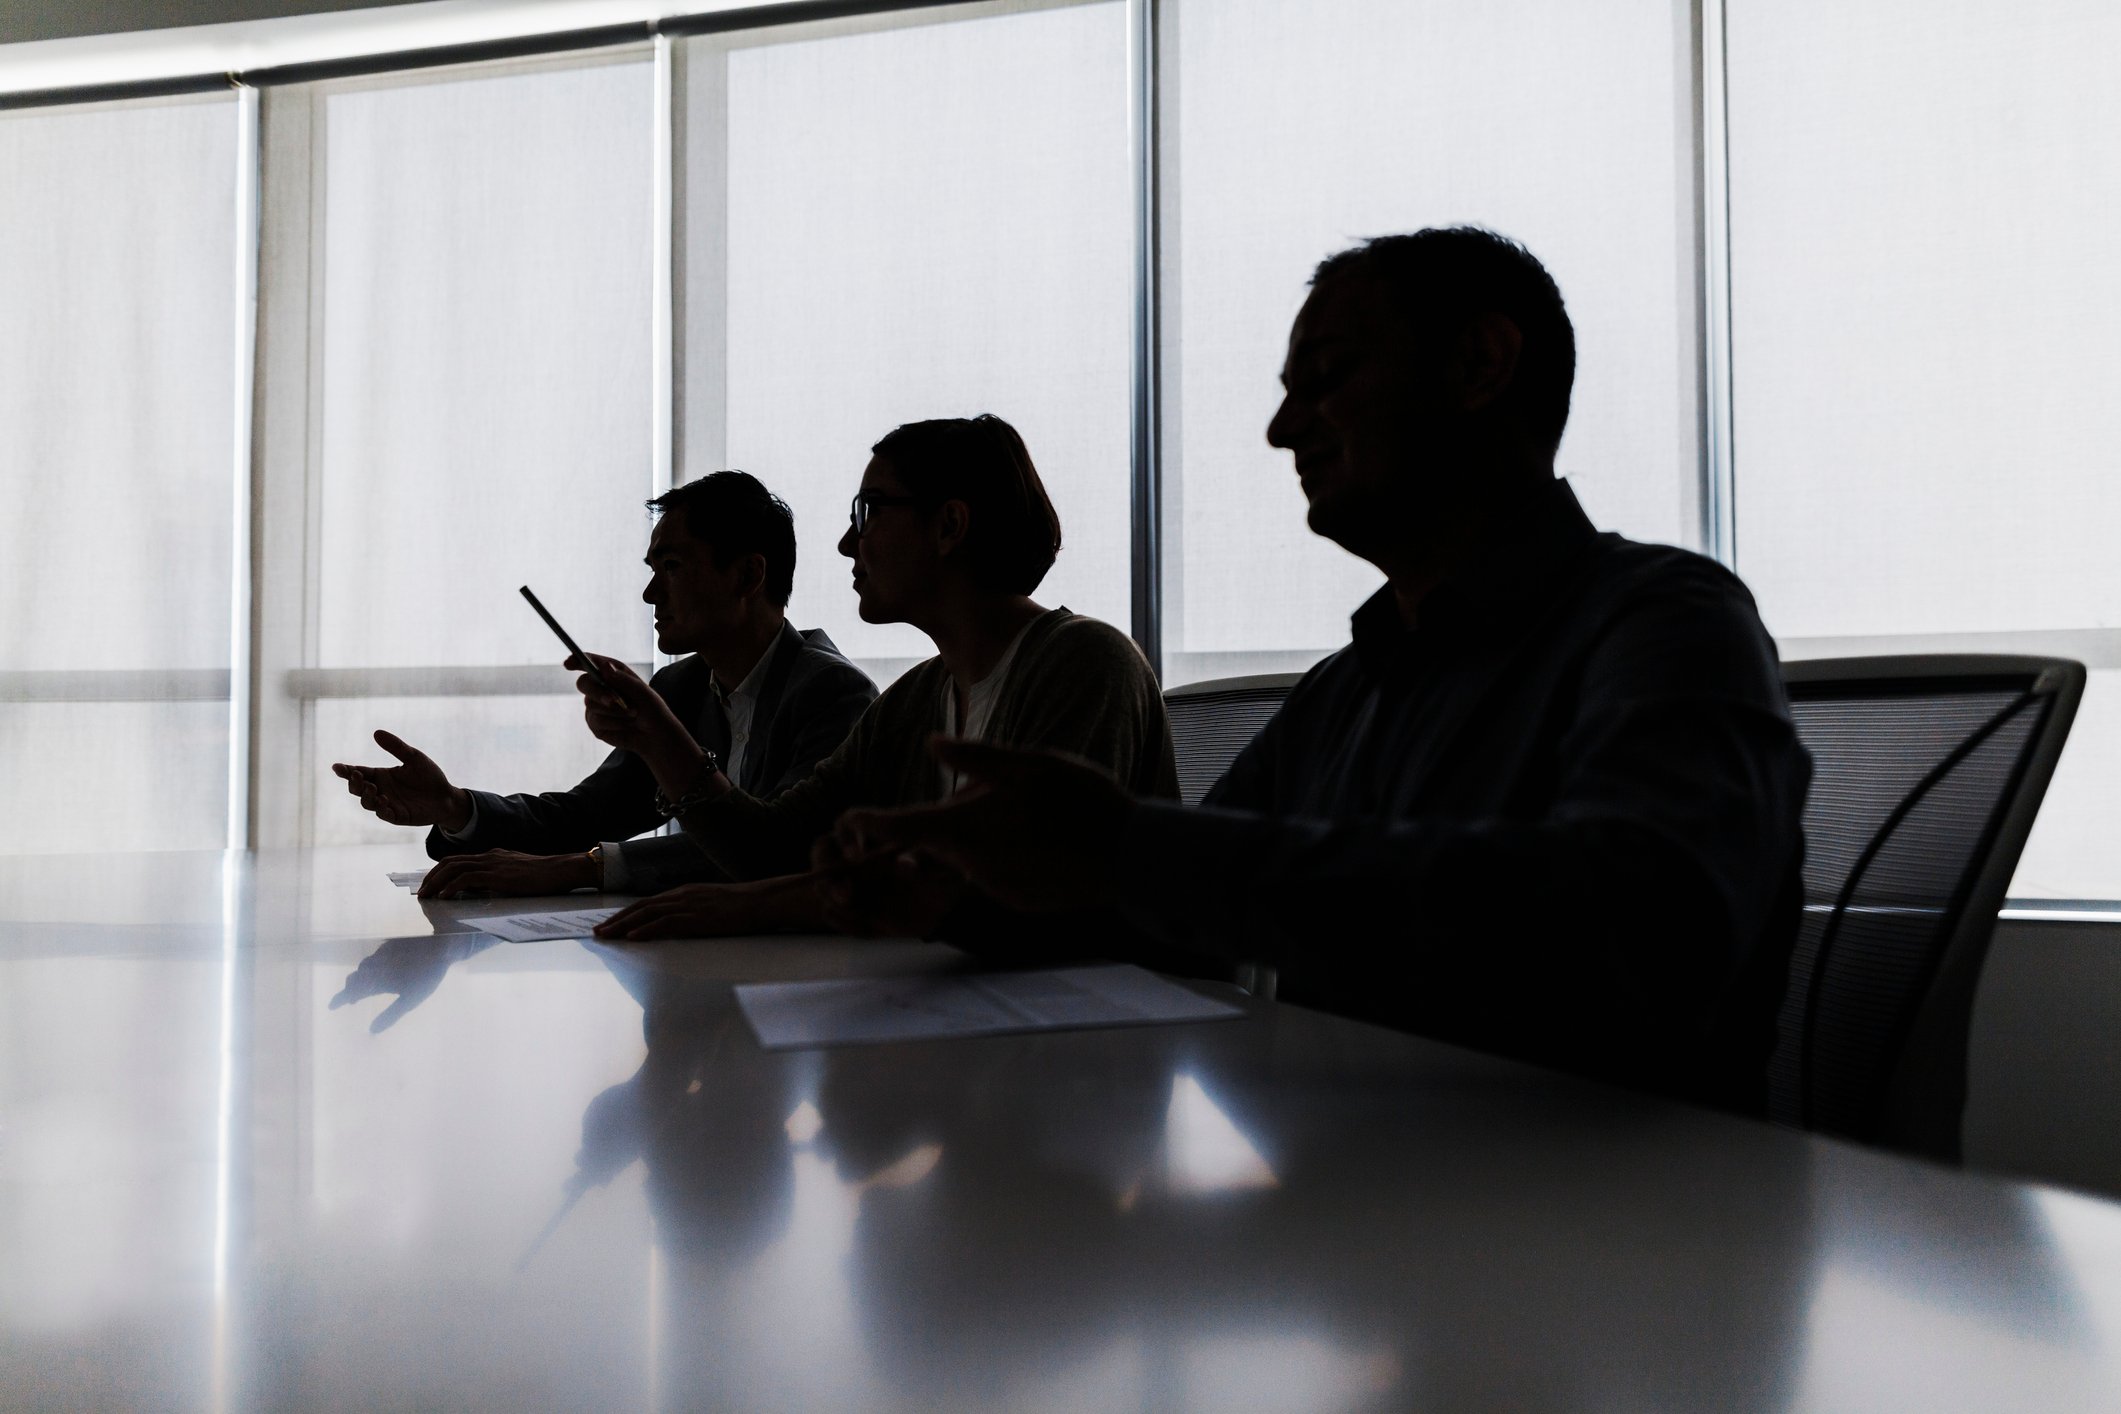 Silhouette of insurers negotiating a med-malpractice case at a meeting table